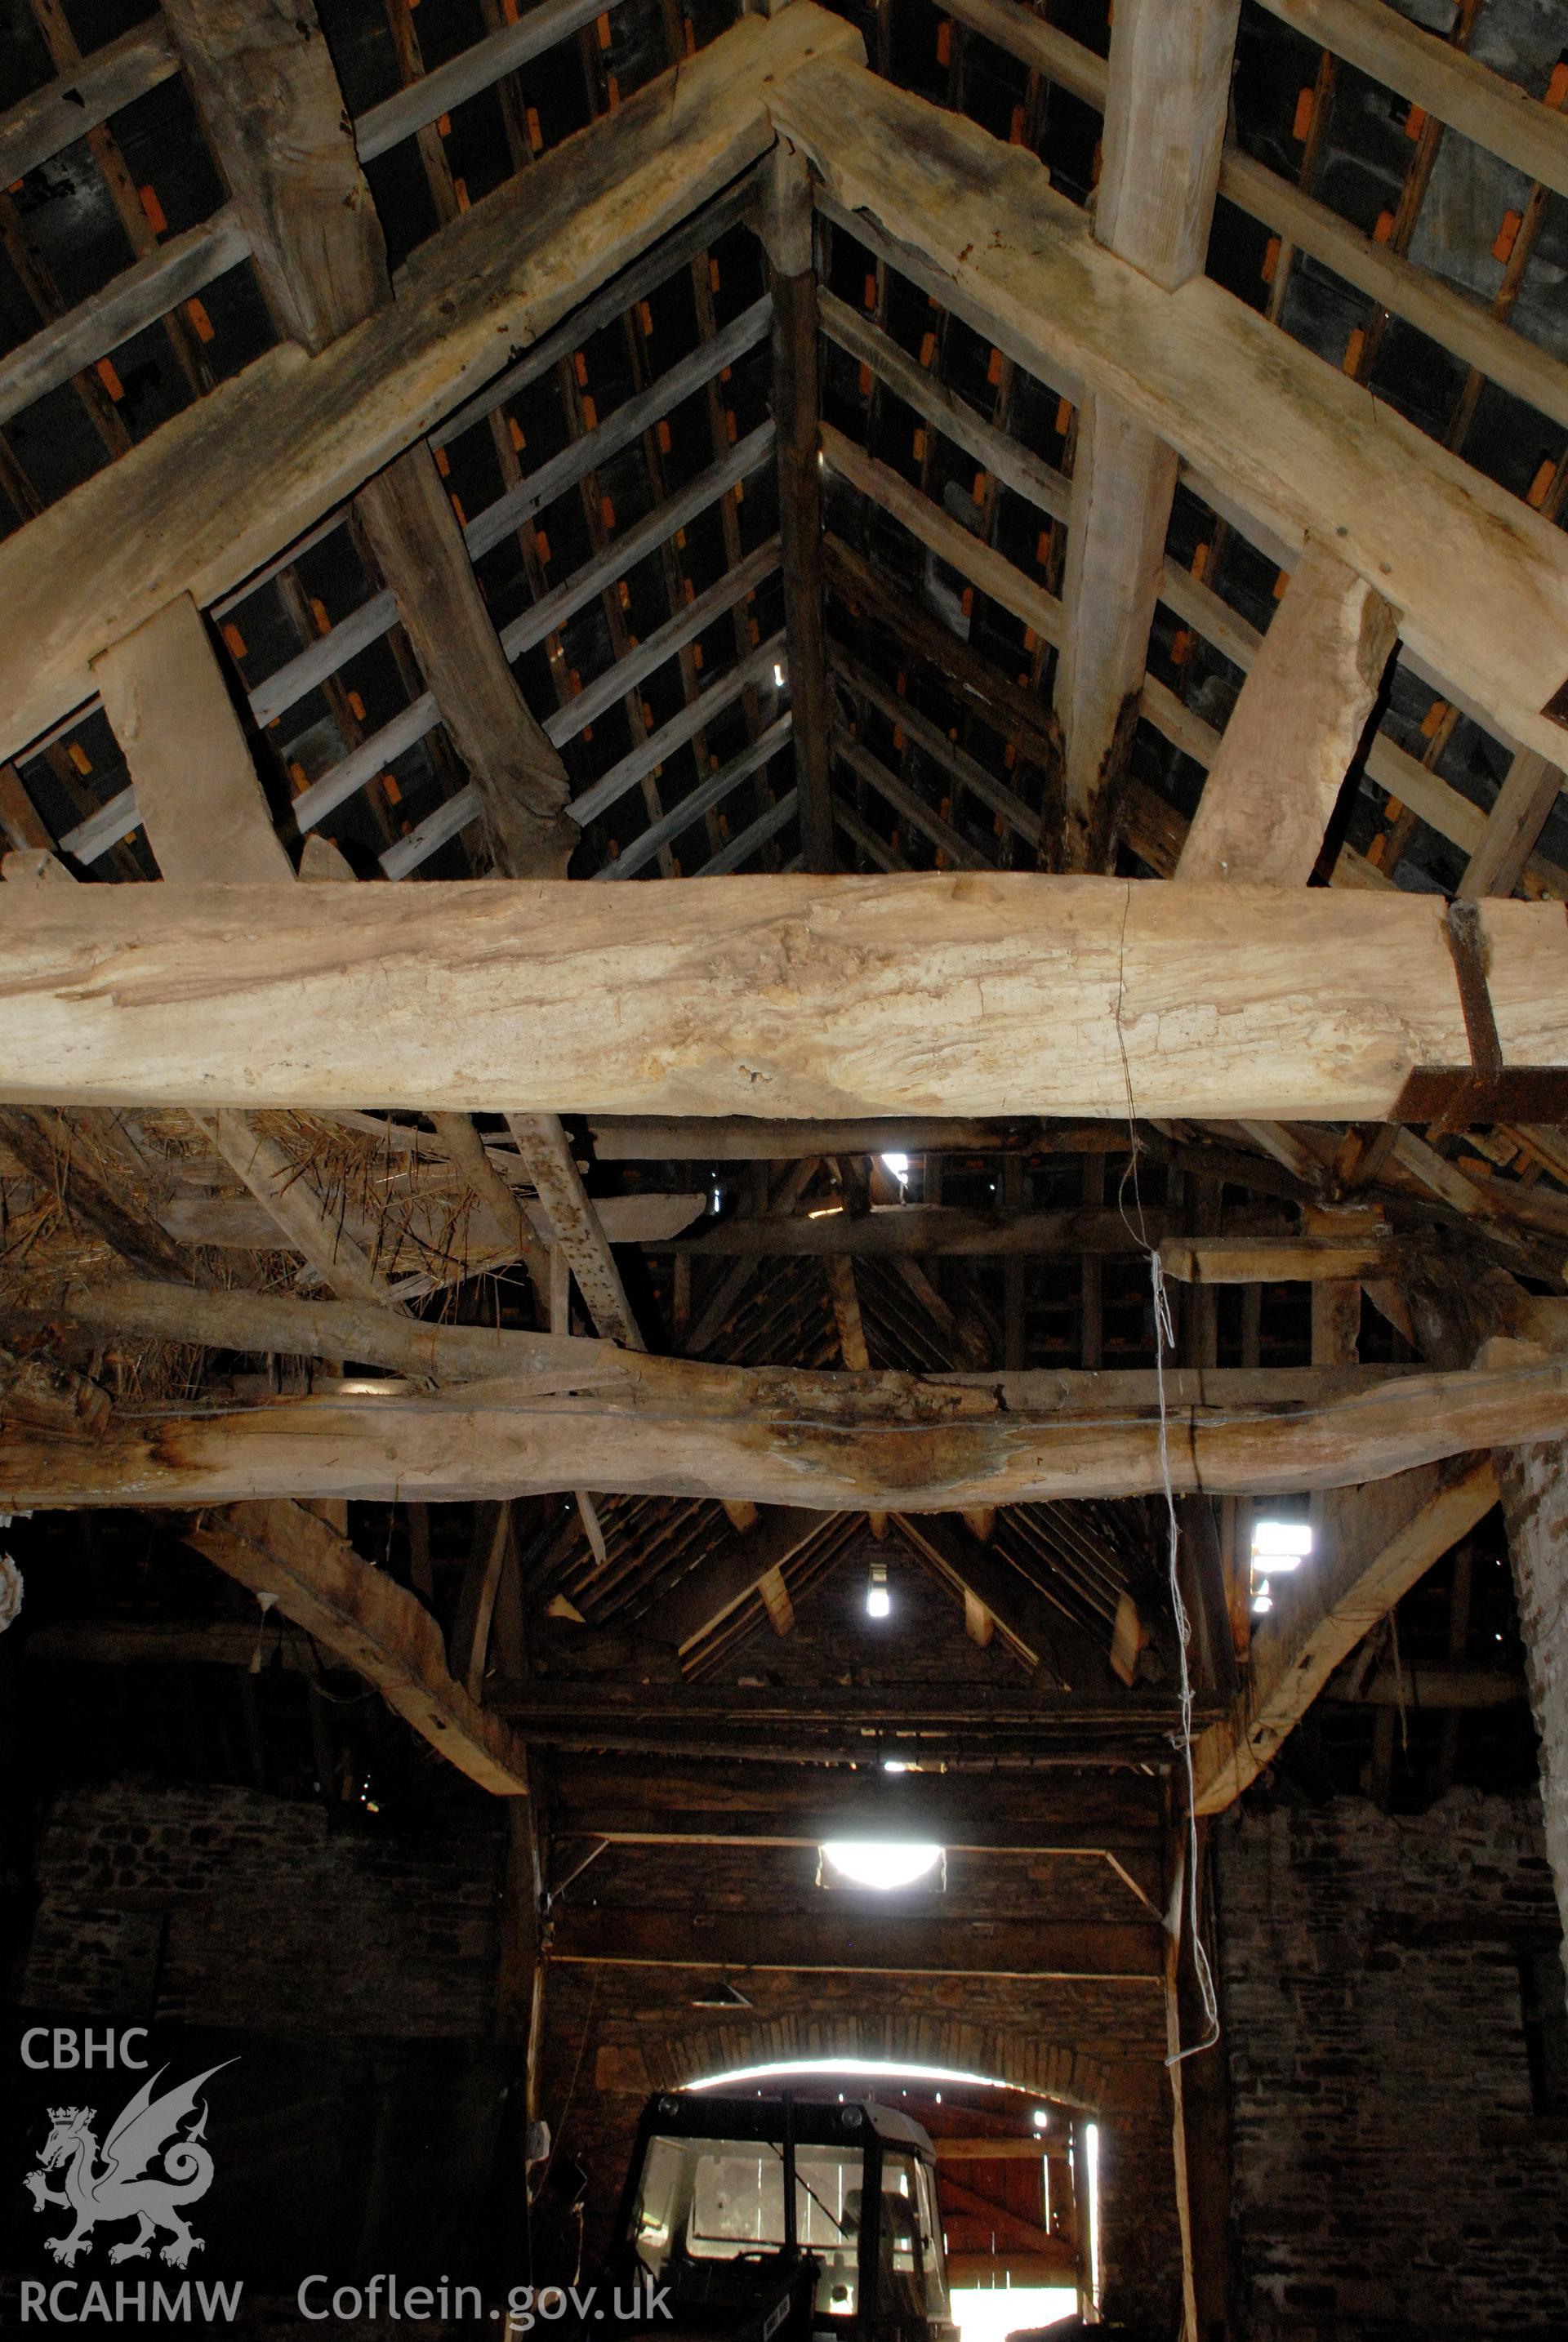 Interior view of the barn looking up and from the west.